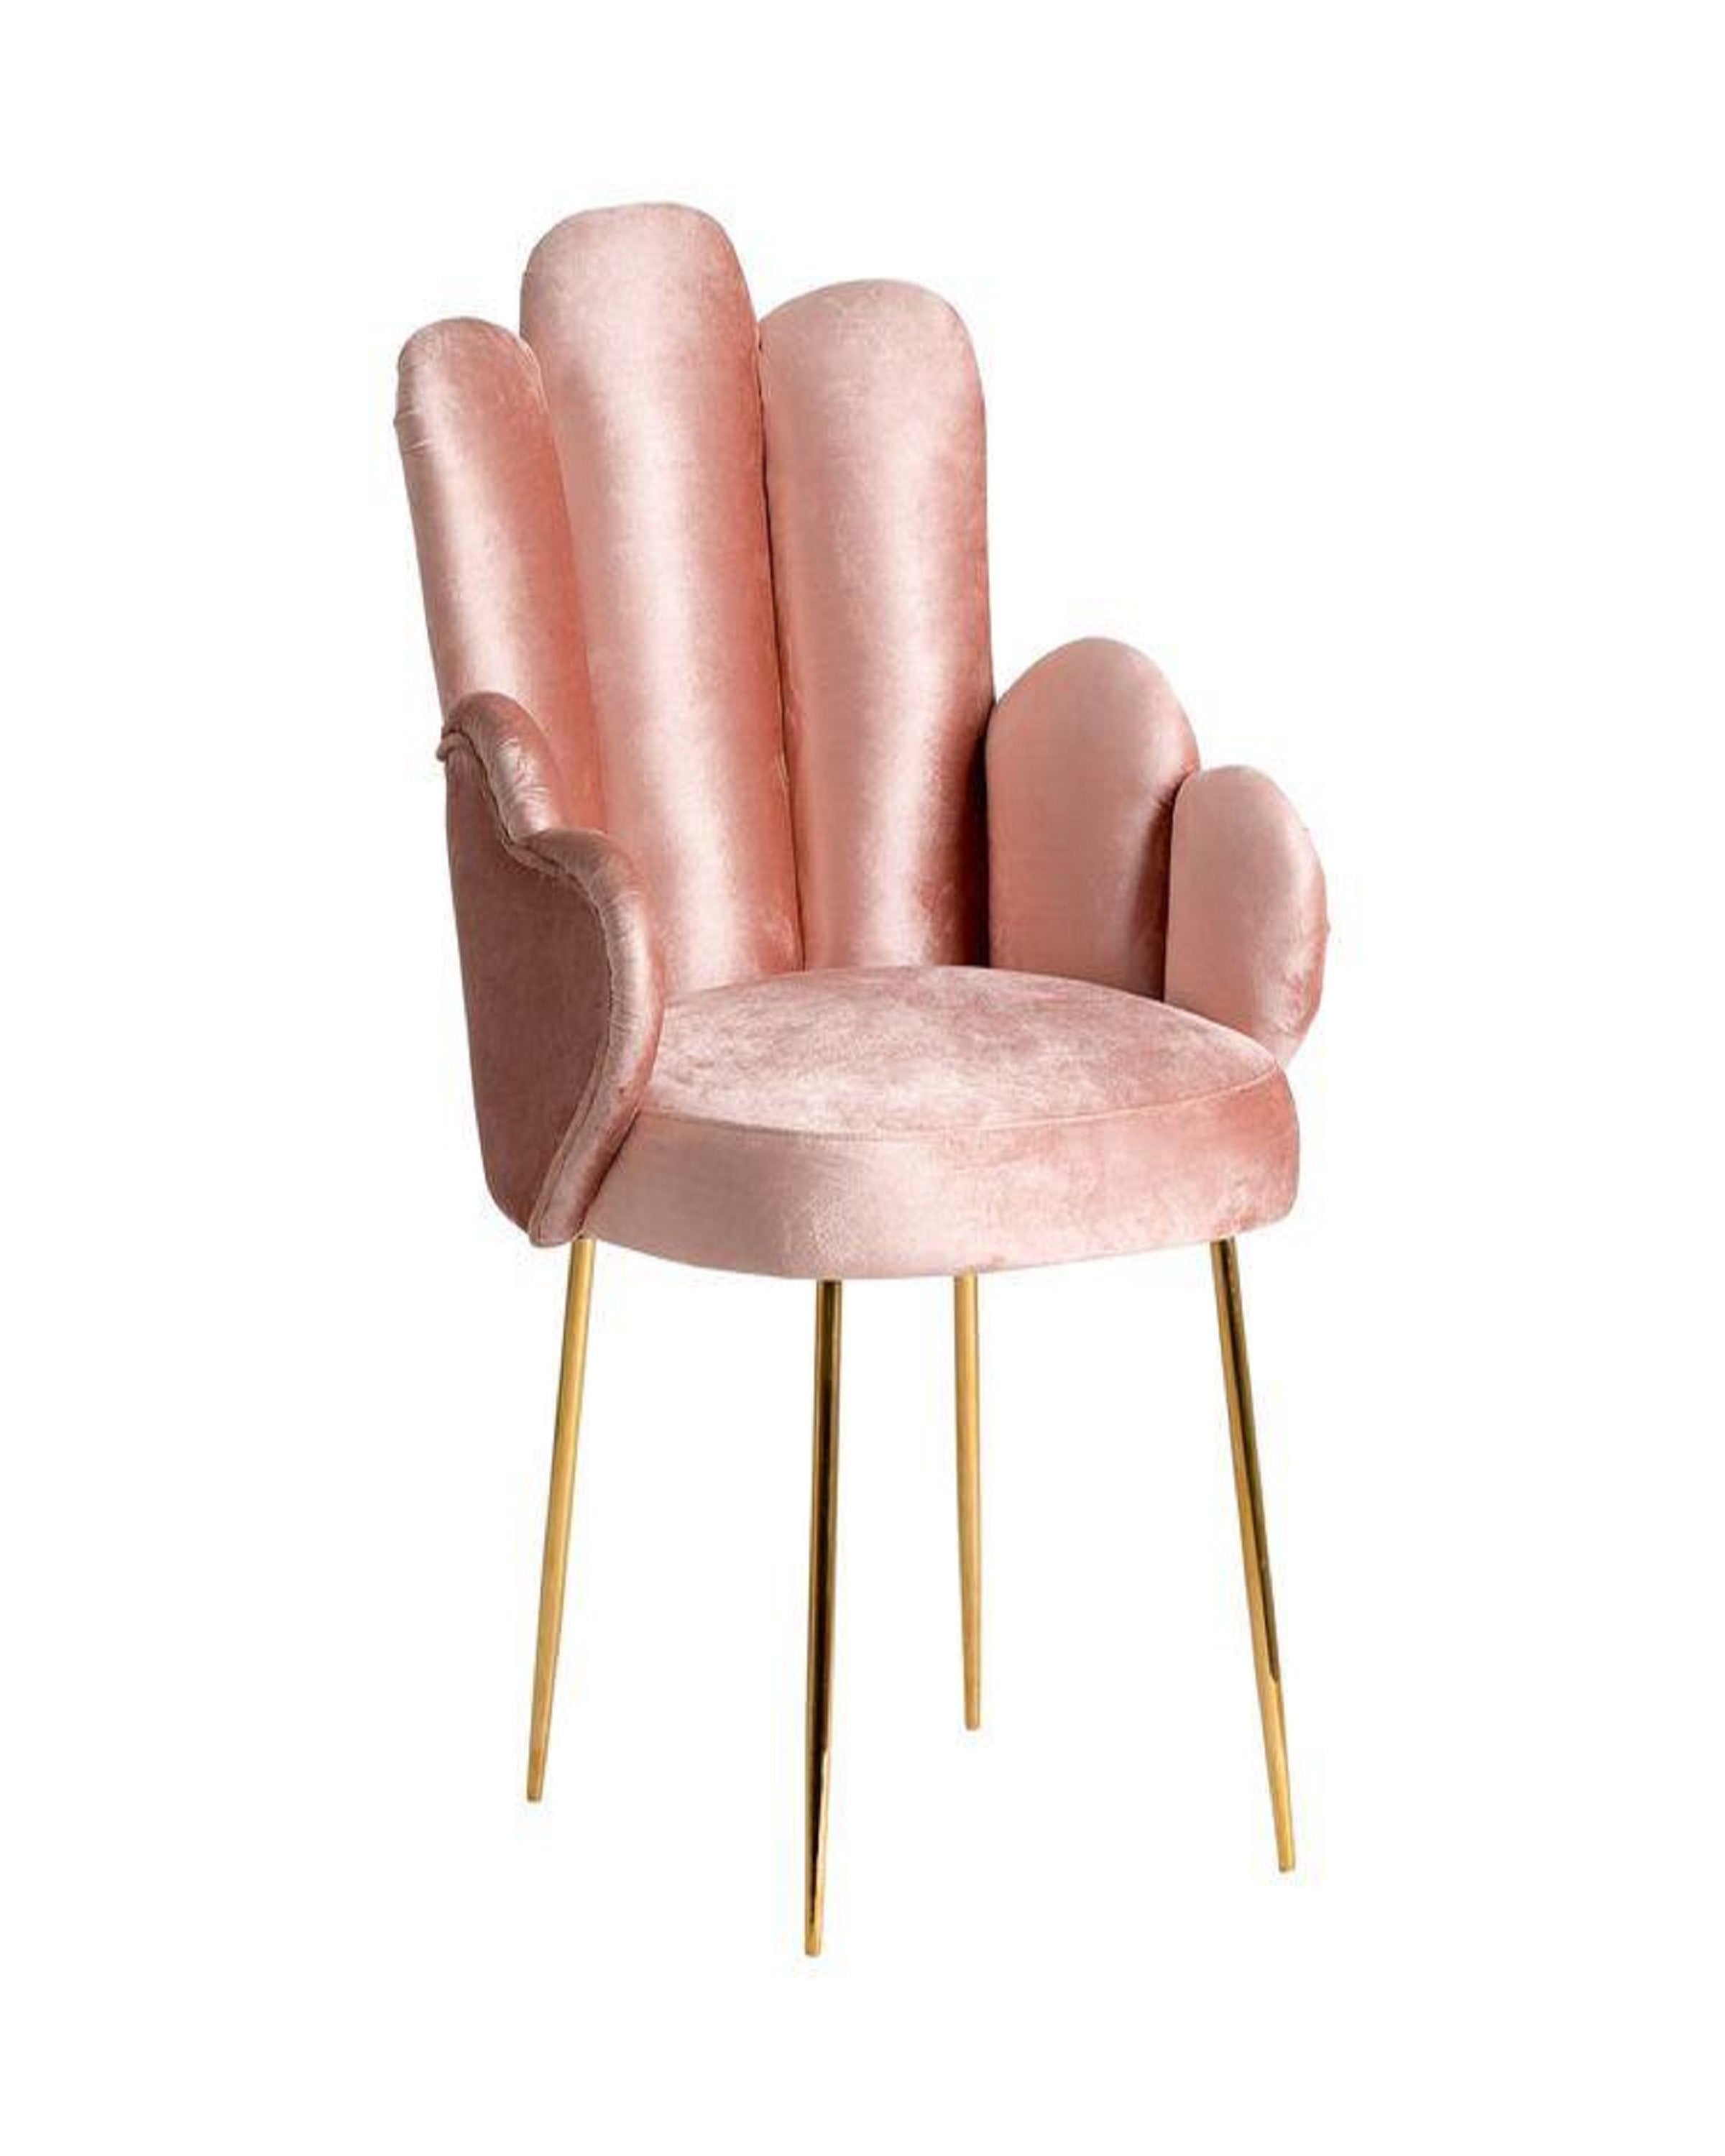 Luxury Pink Chair